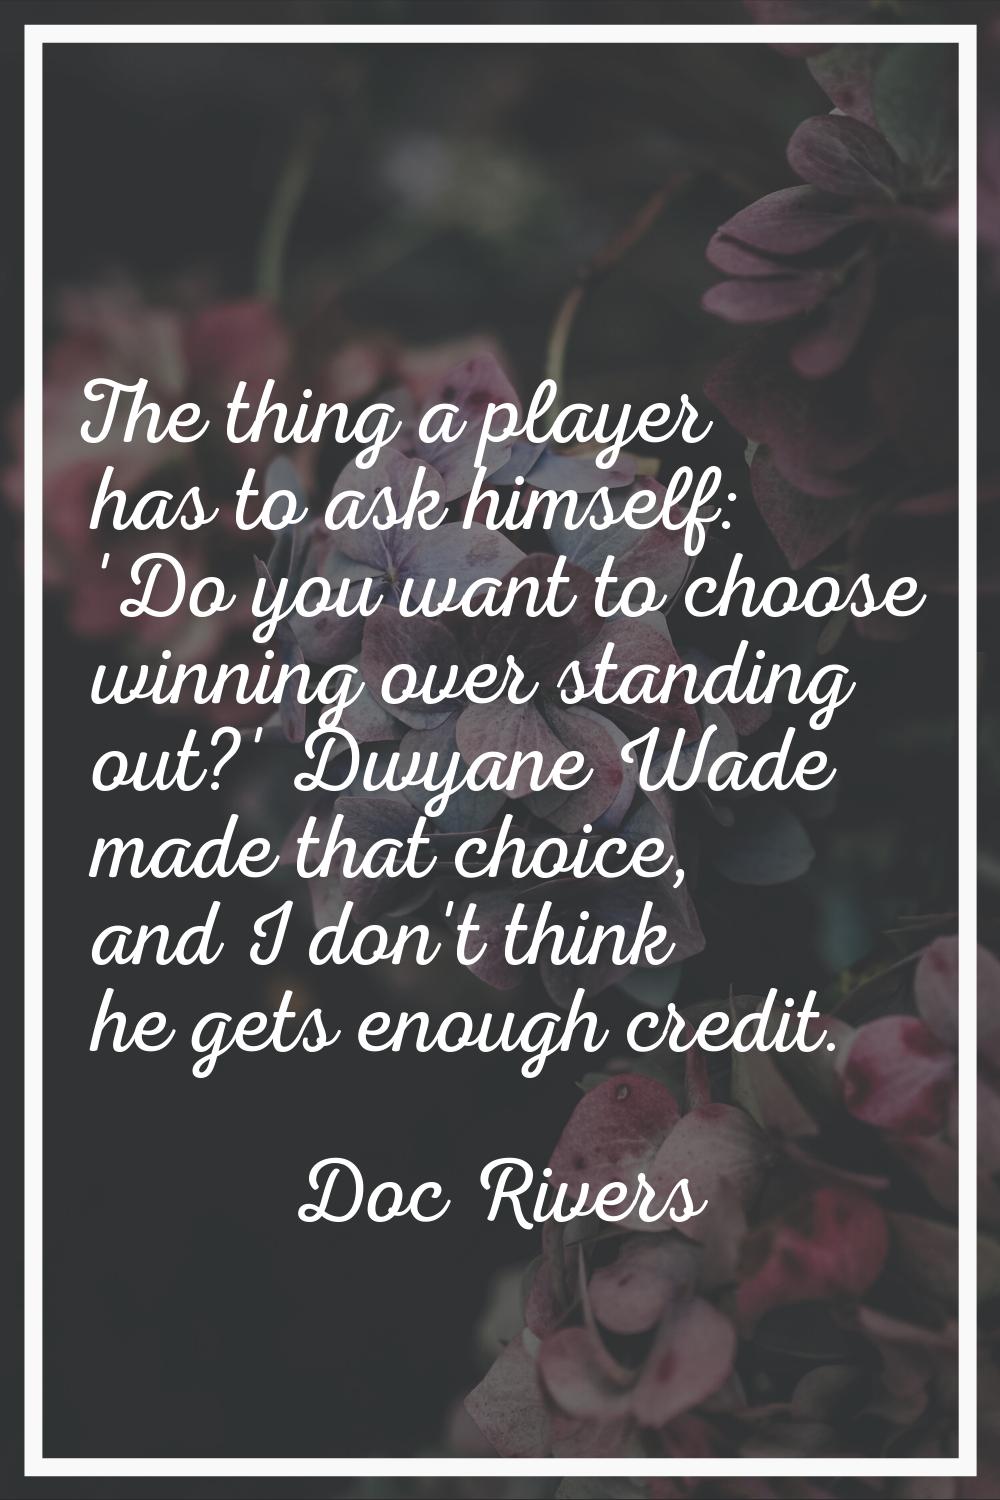 The thing a player has to ask himself: 'Do you want to choose winning over standing out?' Dwyane Wa